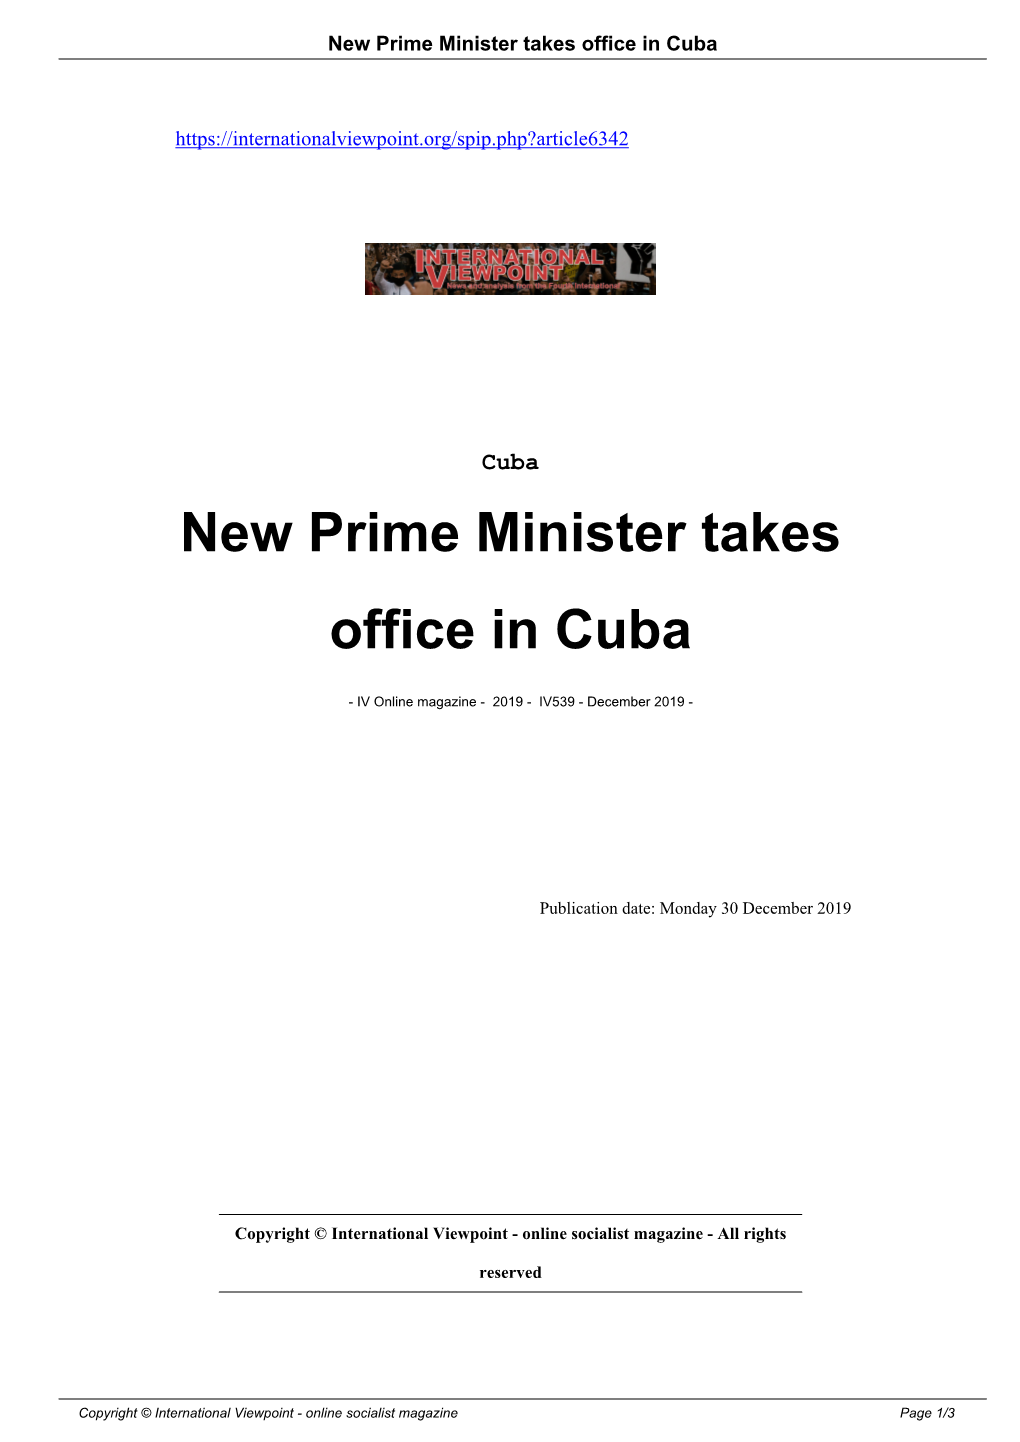 New Prime Minister Takes Office in Cuba